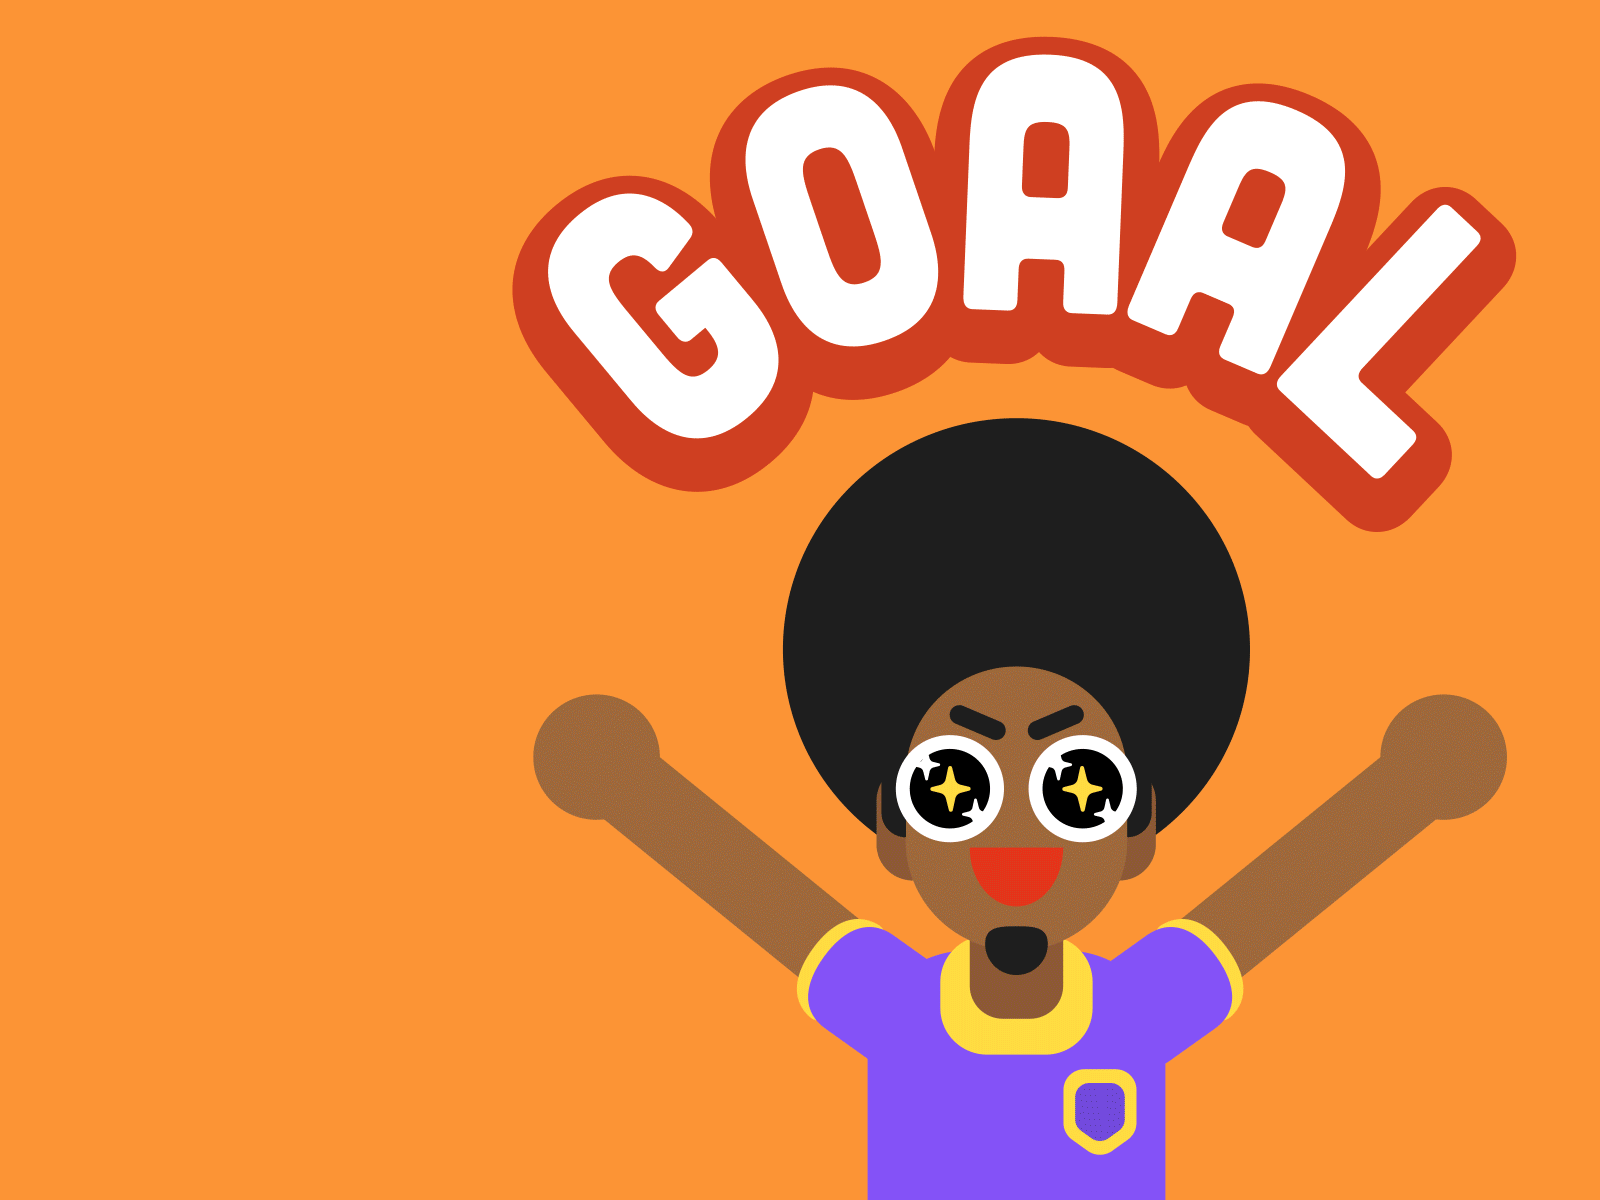 GOAL | Lottie Animations for YouNow by Squid&Pig on Dribbble